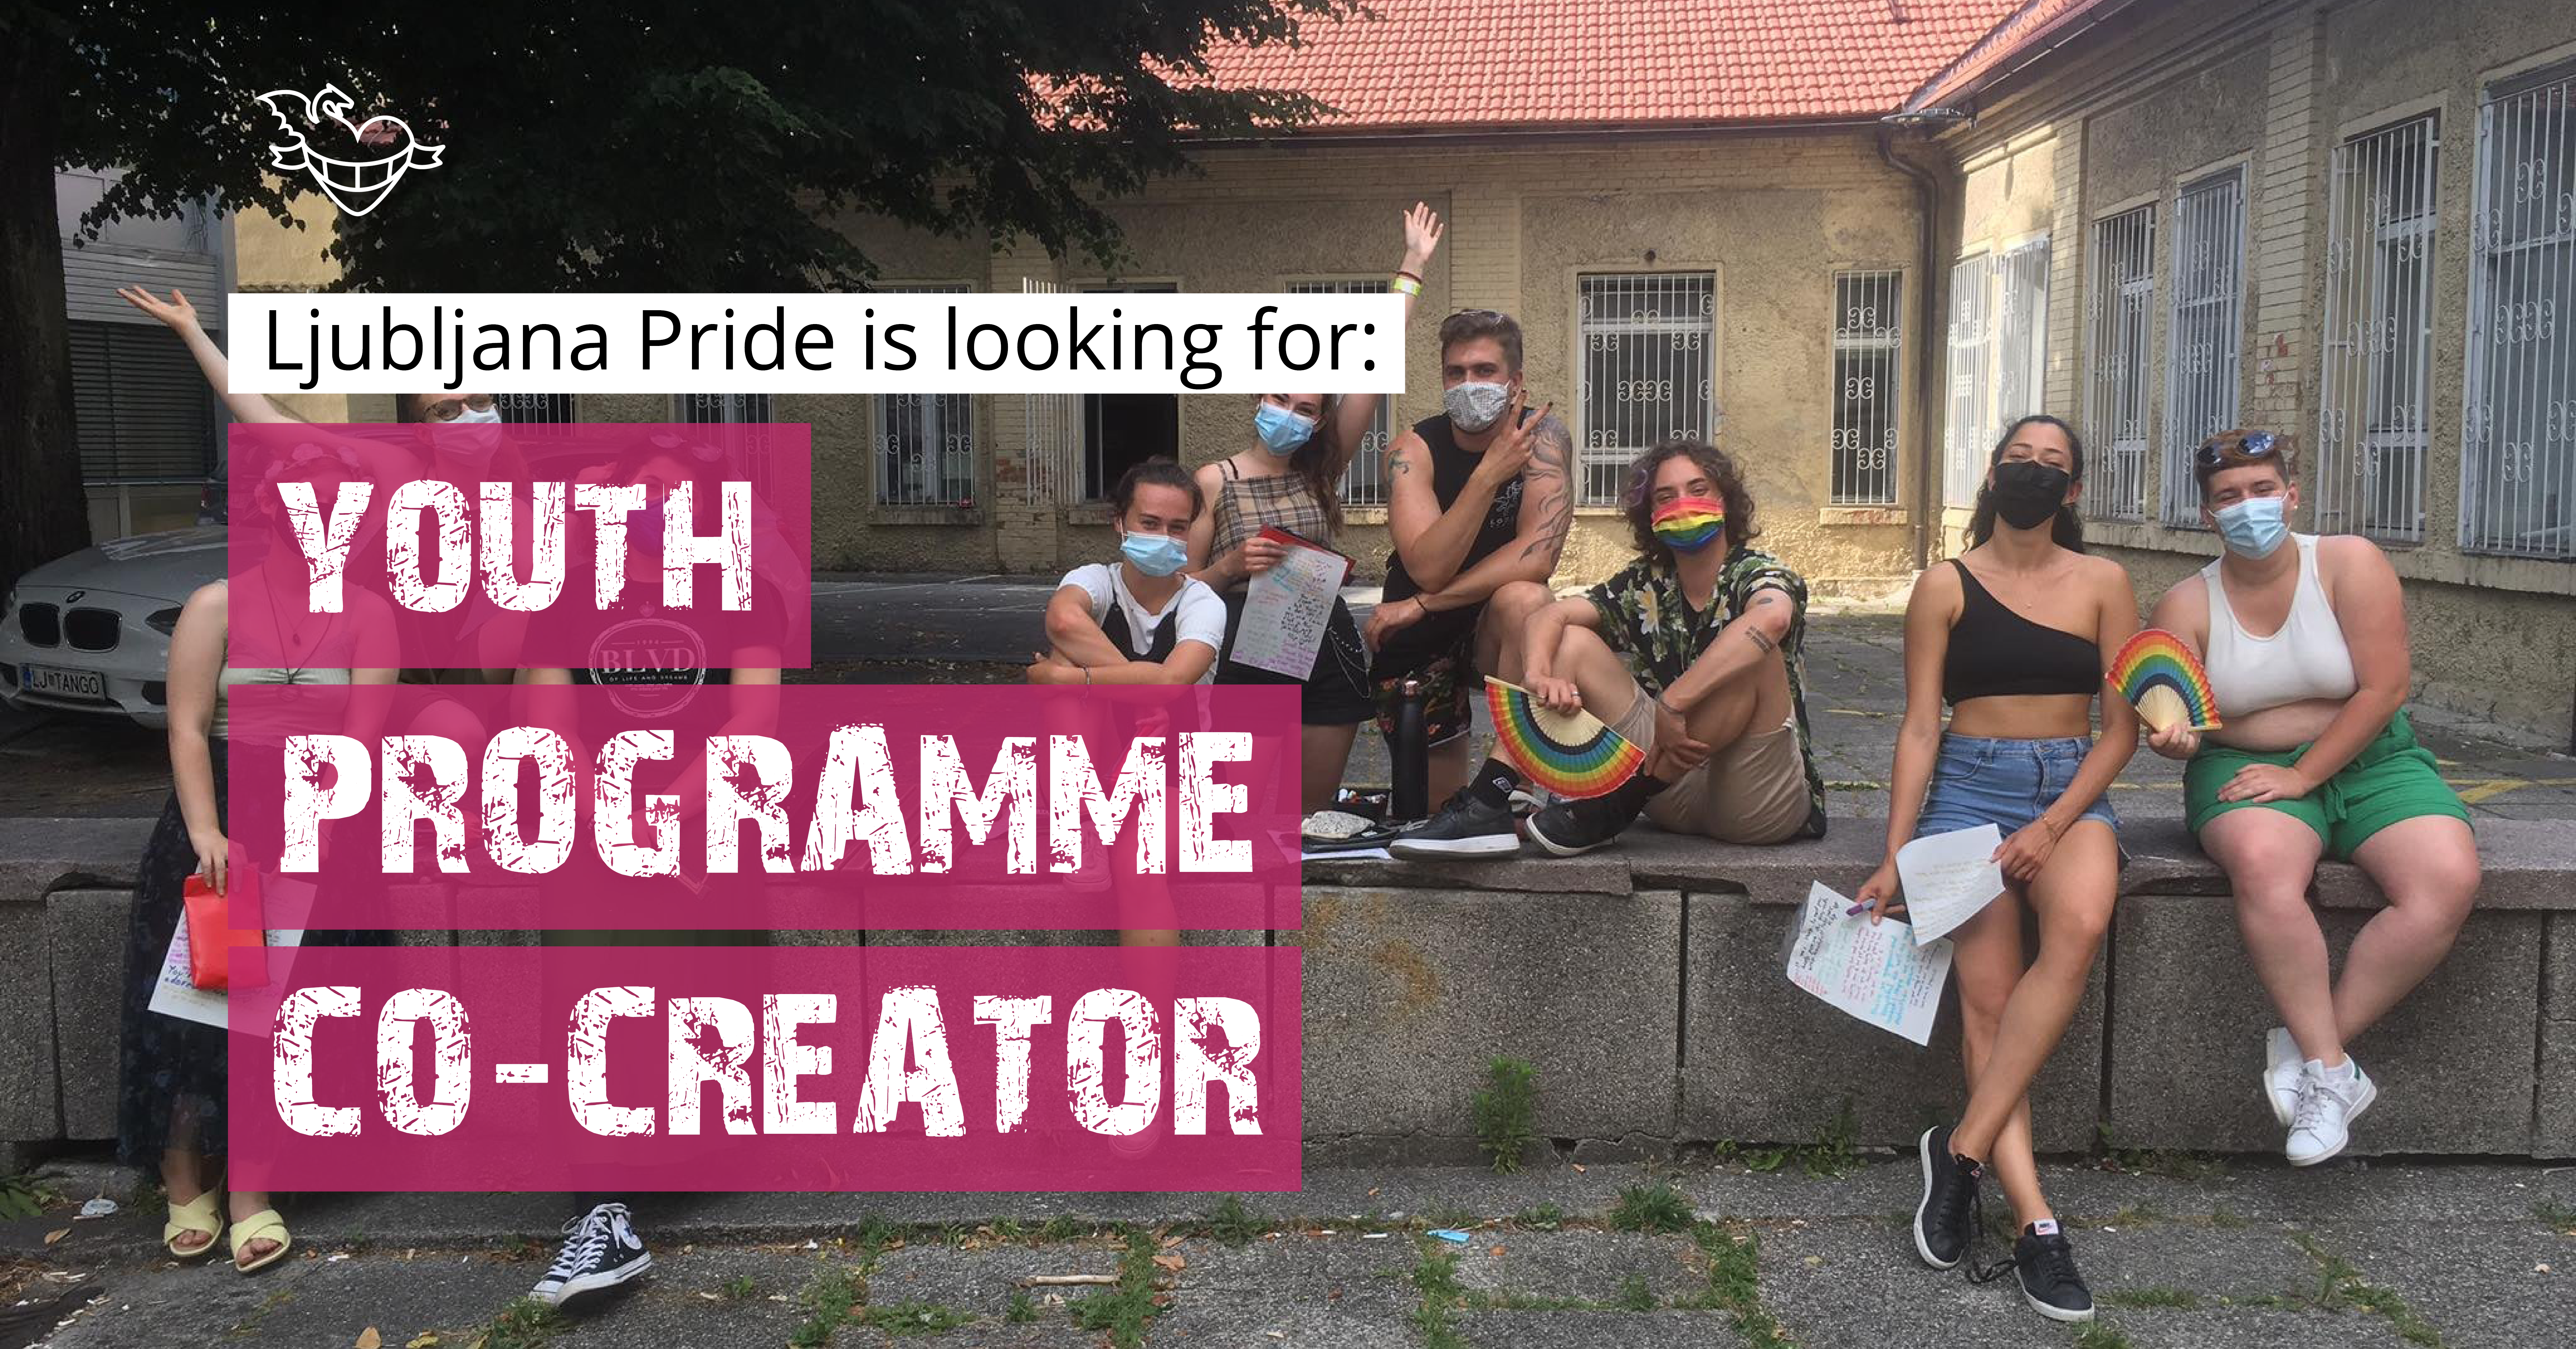 One year ESC volunteering opportunity at Ljubljana Pride: youth programme co-creator